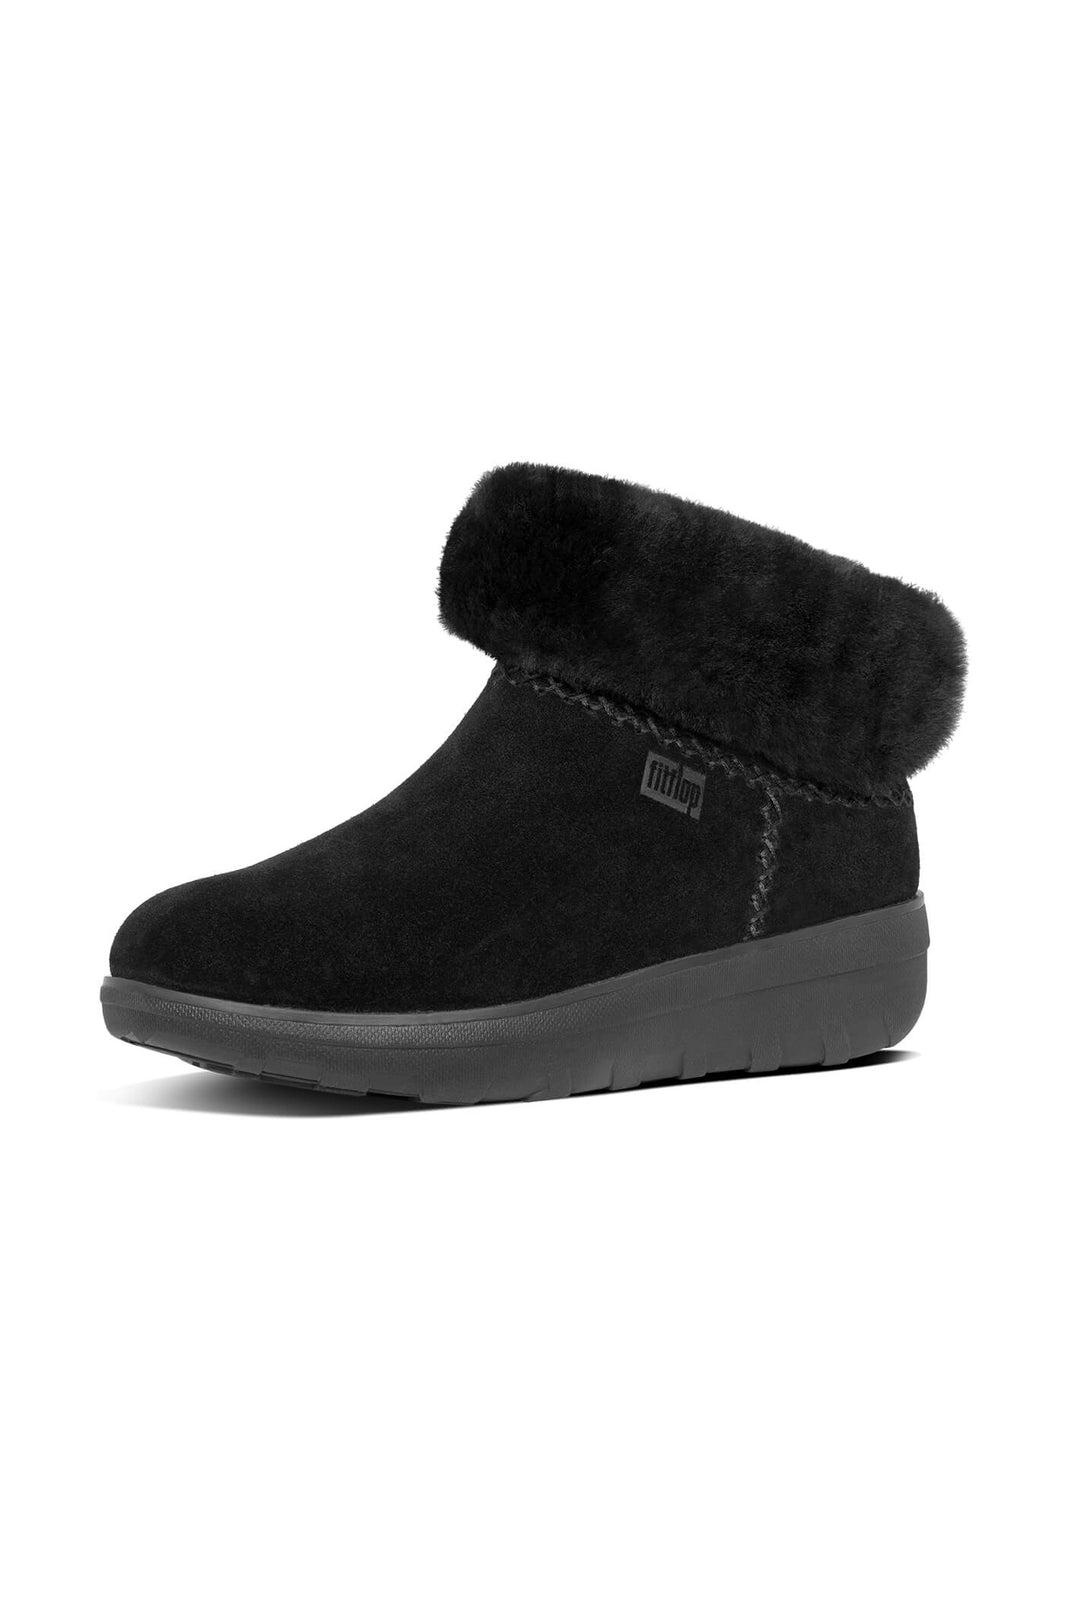 Fitflop Mukluk Shorty III Y88-090 All Black Suede Ankle Boot - Shirley Allum